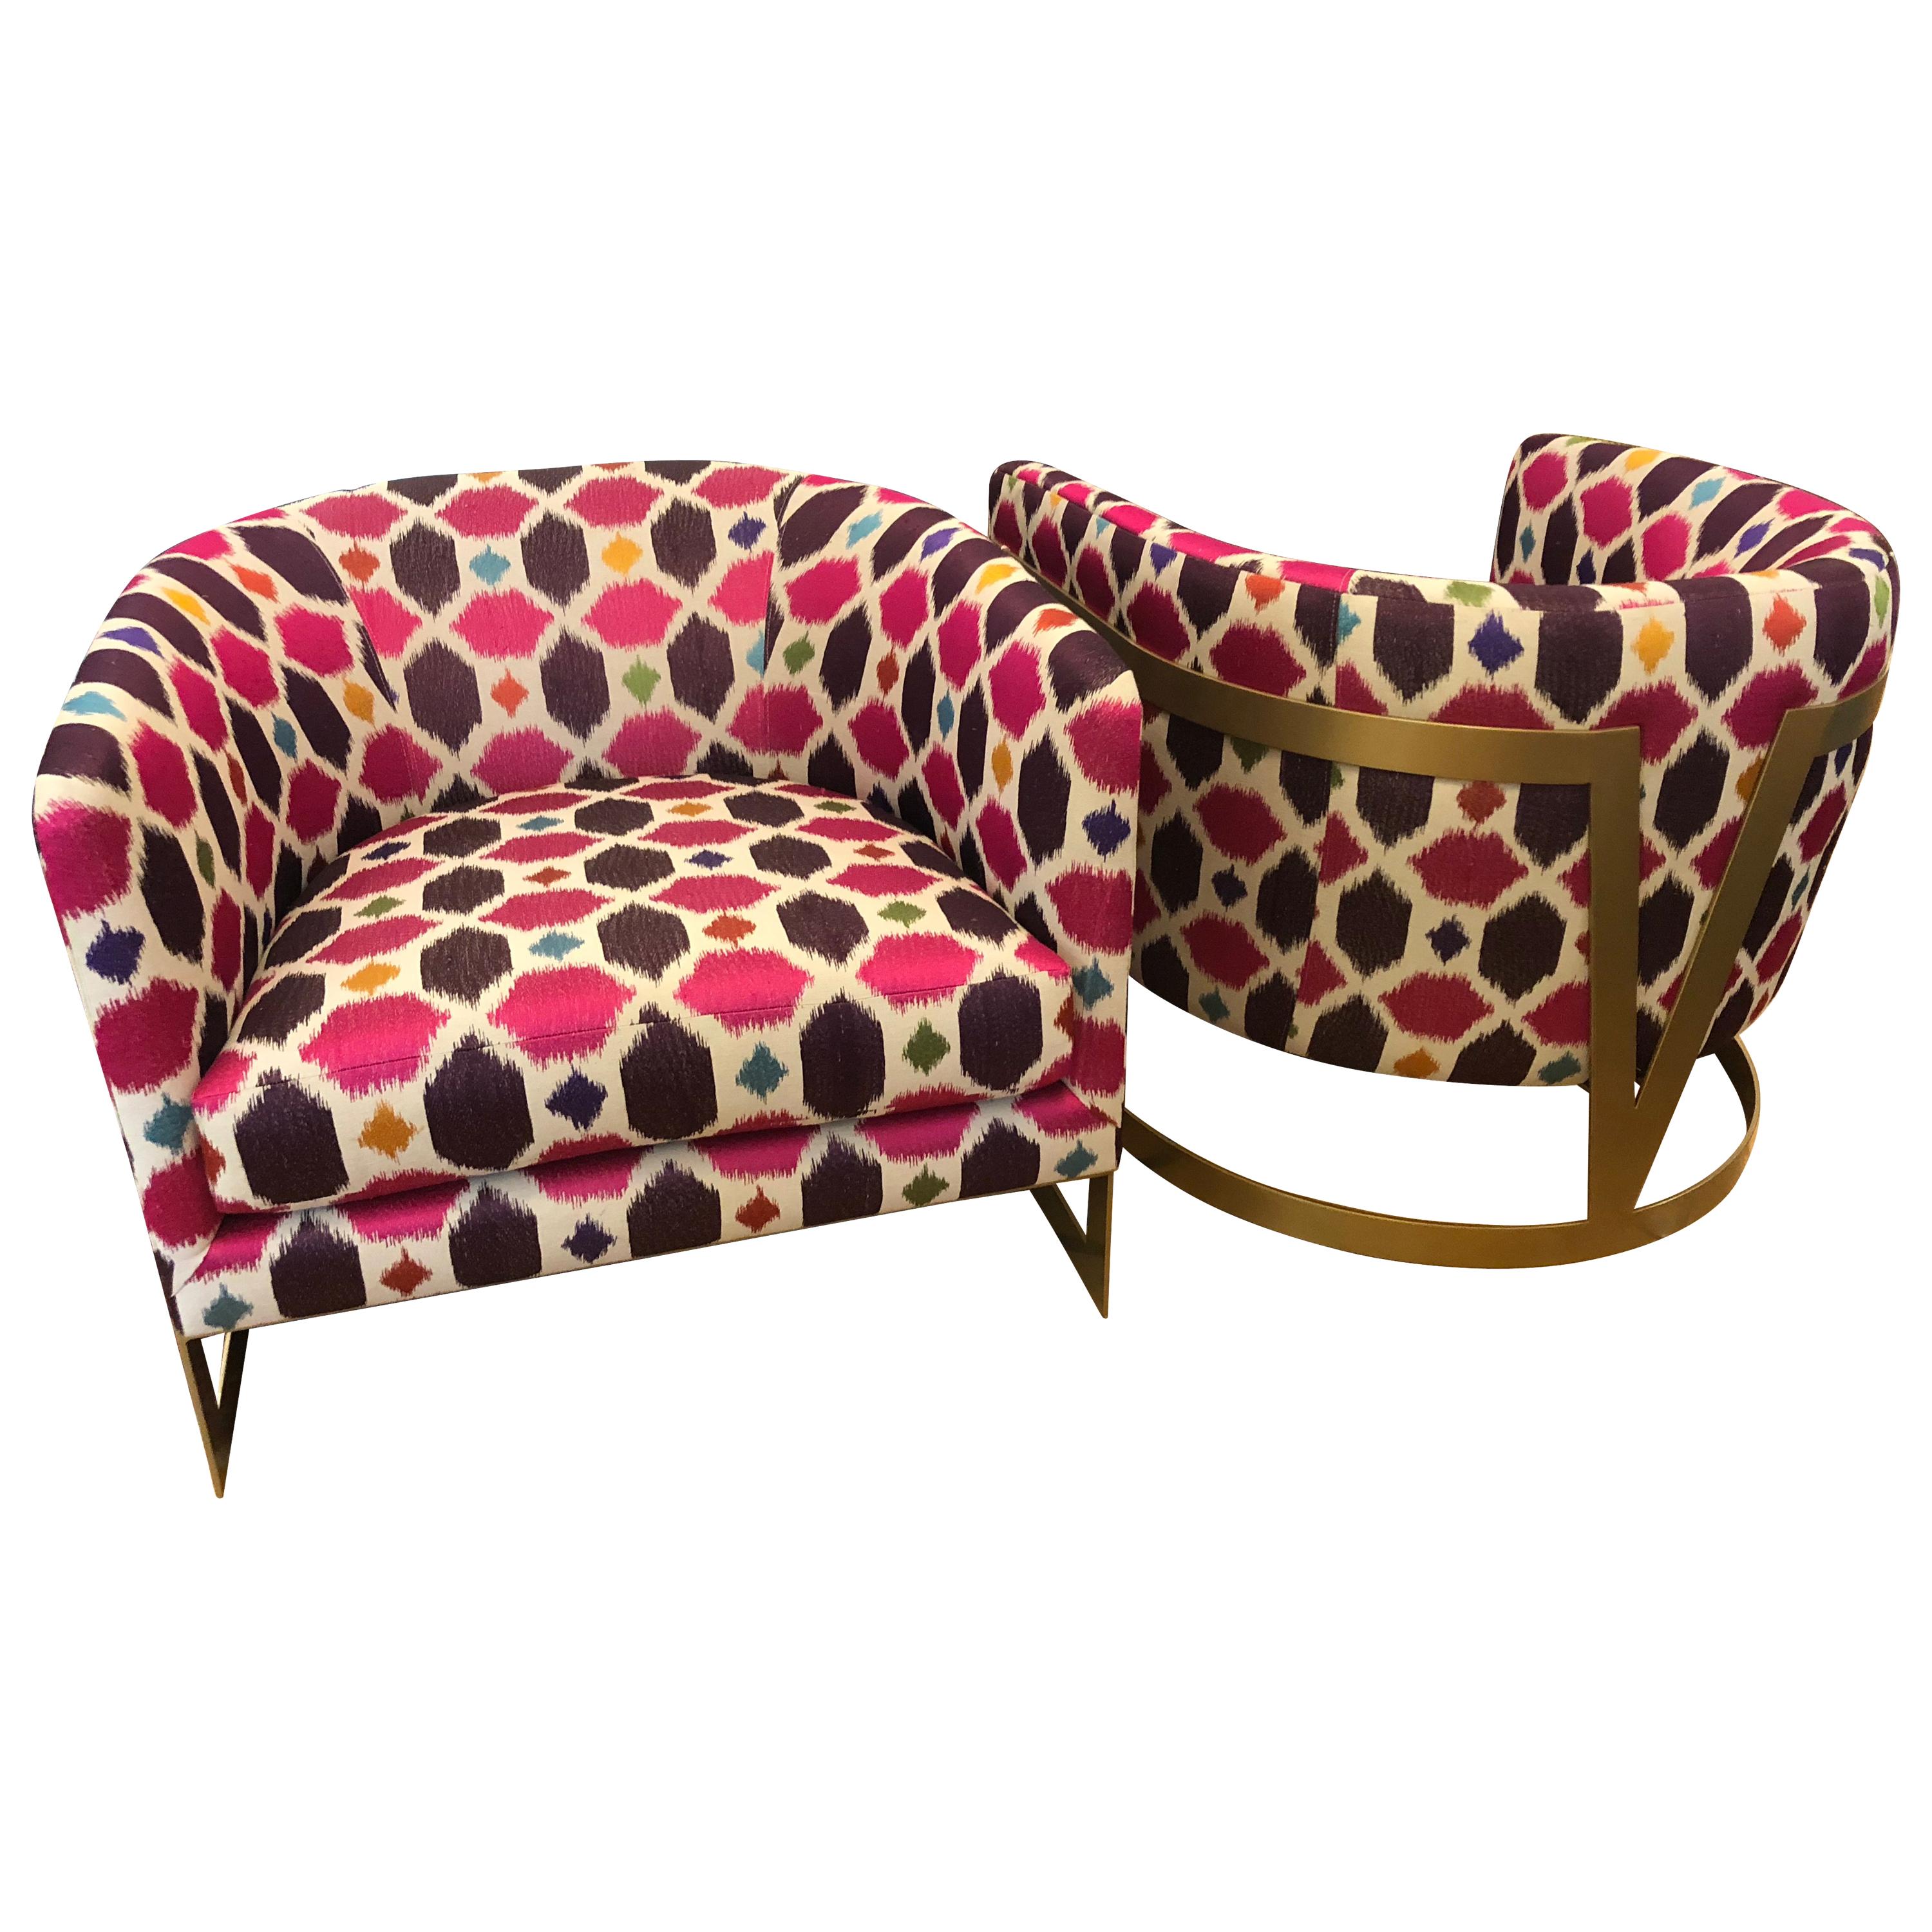 Pair of Nathan Anthony Korz Chair by Tina Nicole and Kravet Fabric im Angebot